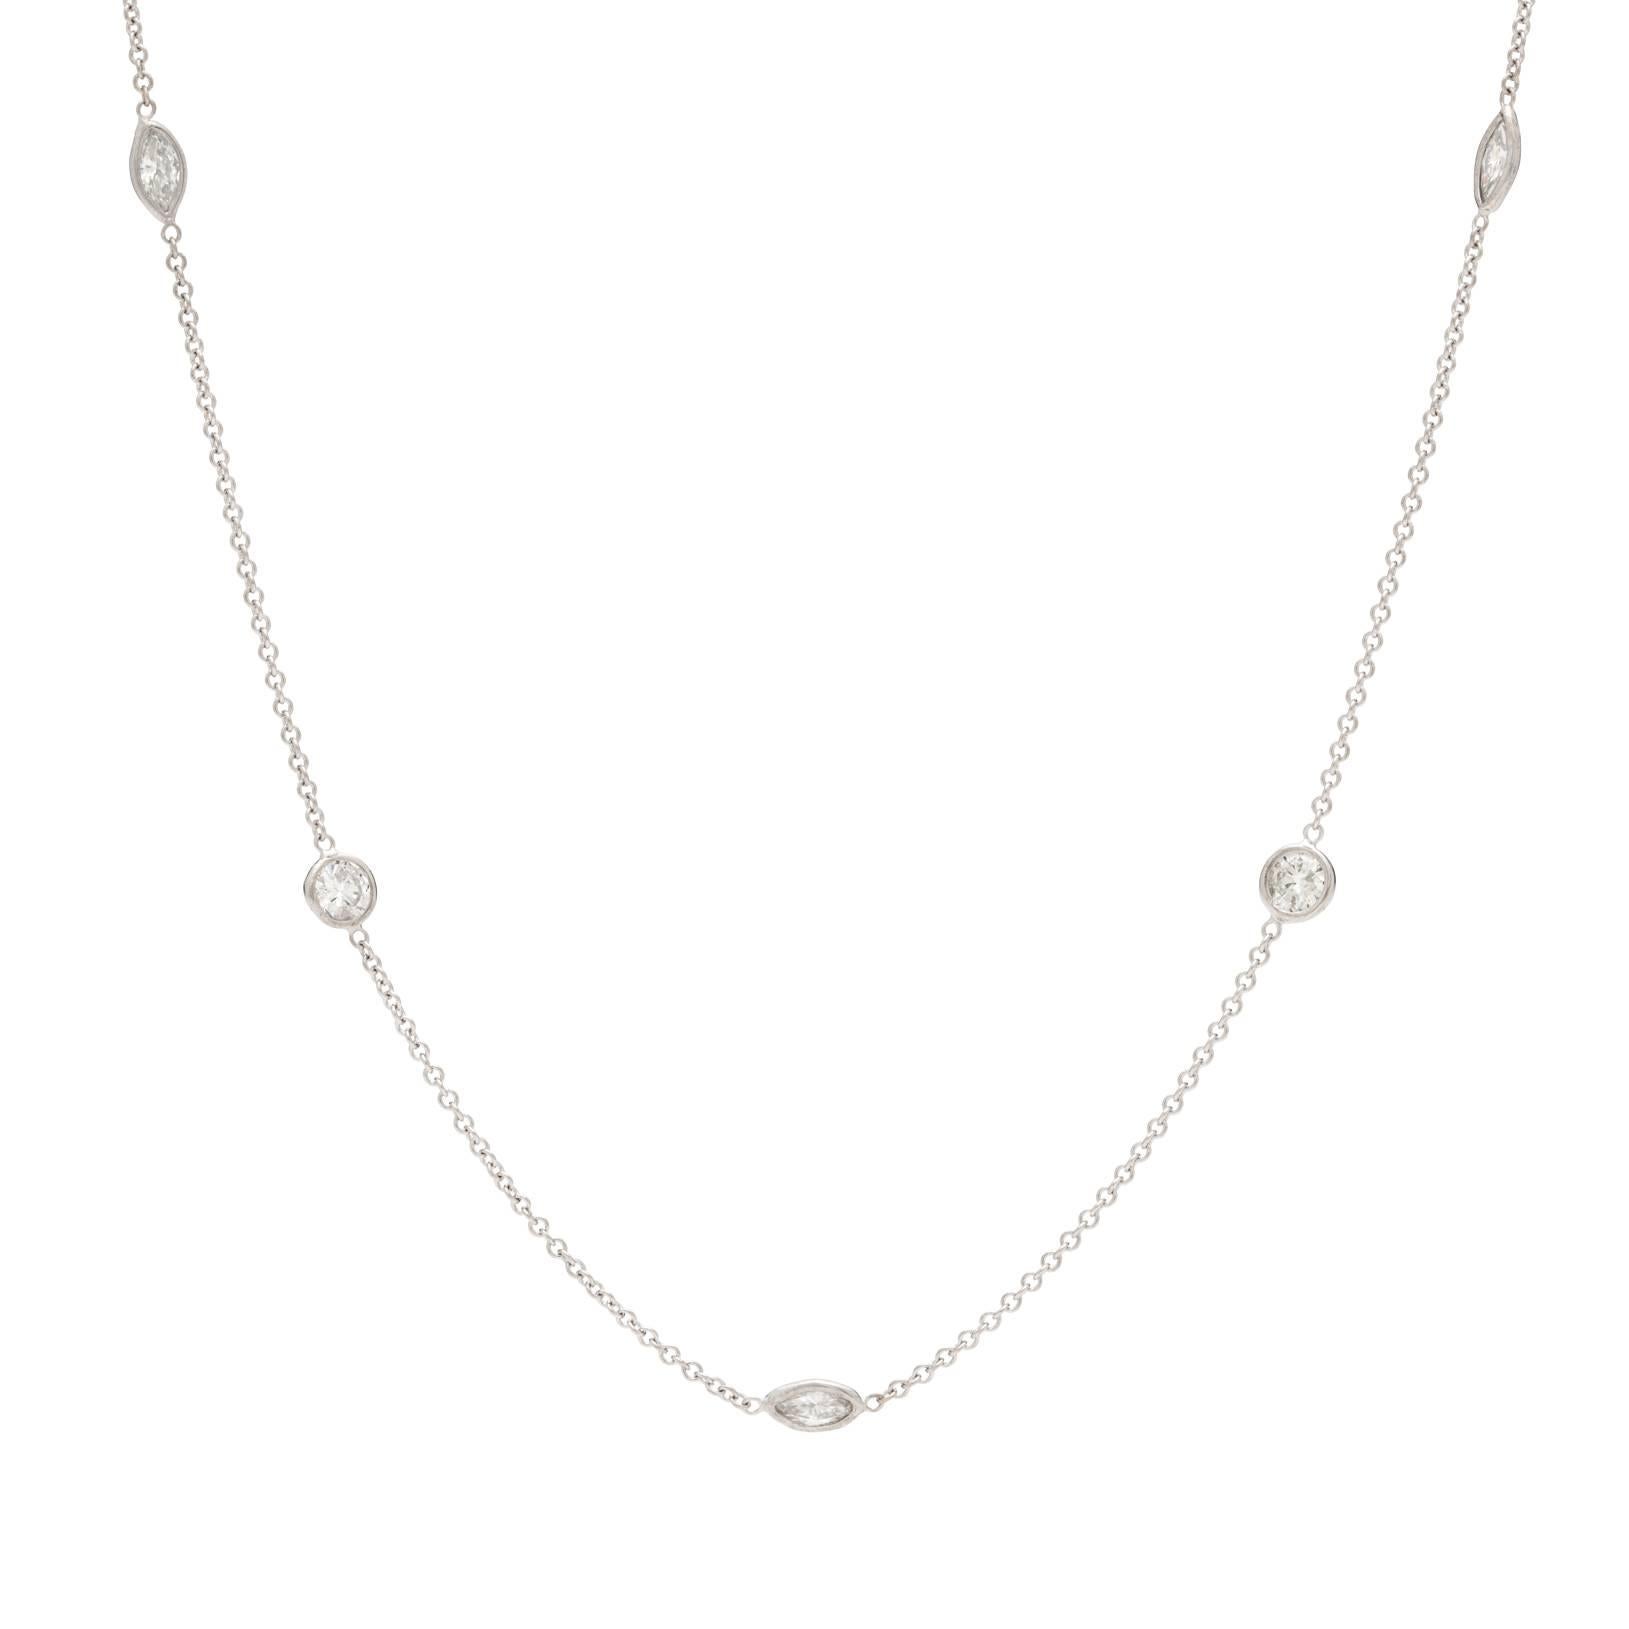 Diamonds by The Yard Necklace Featuring Rounds and Marquises